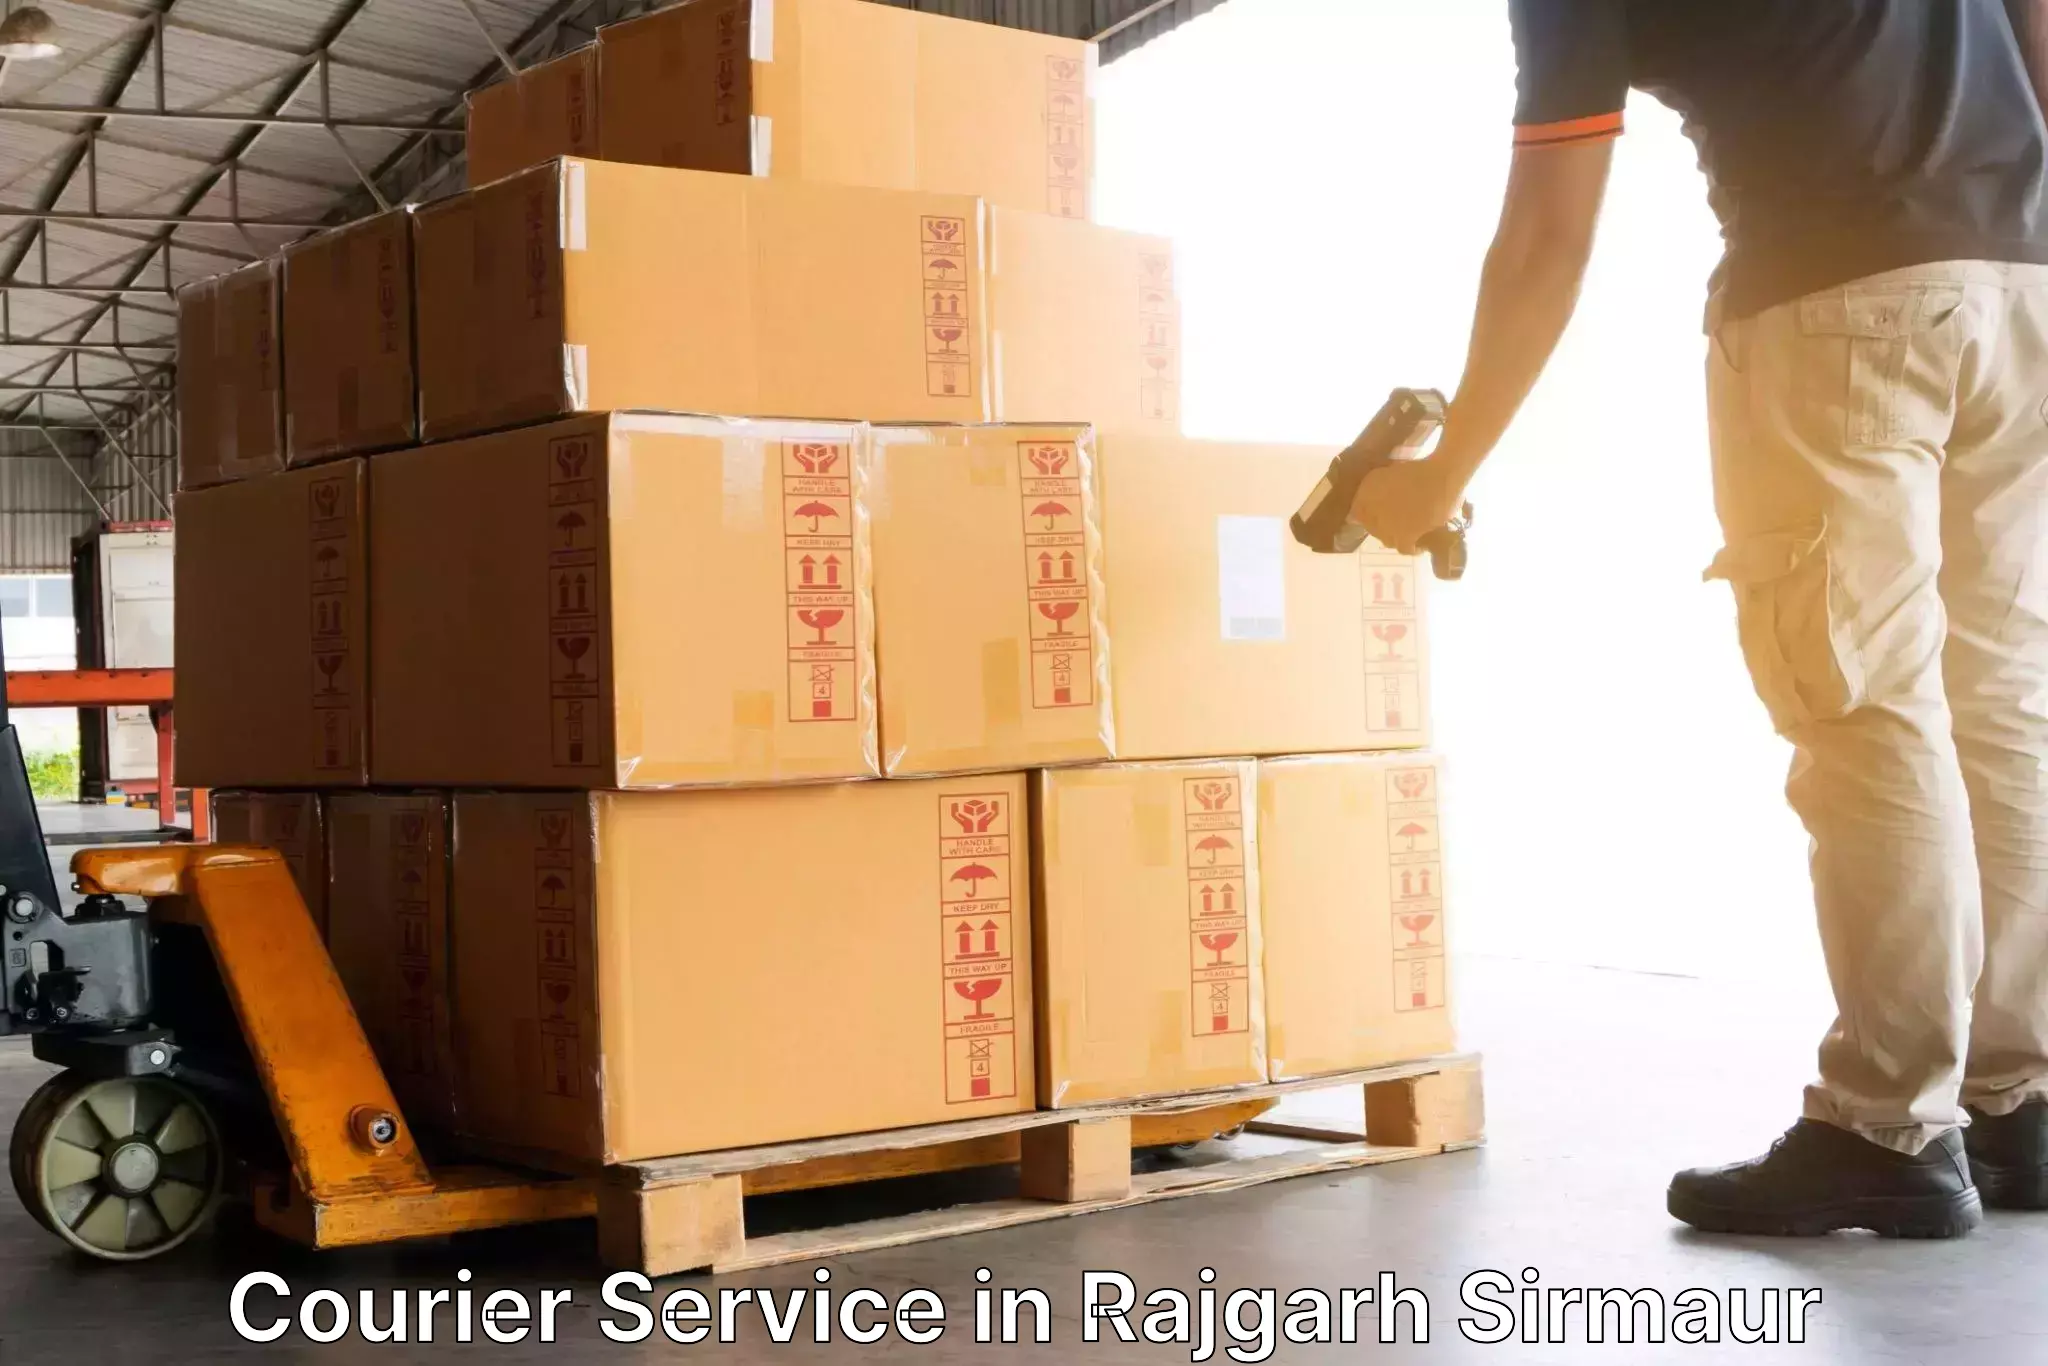 Track and trace shipping in Rajgarh Sirmaur